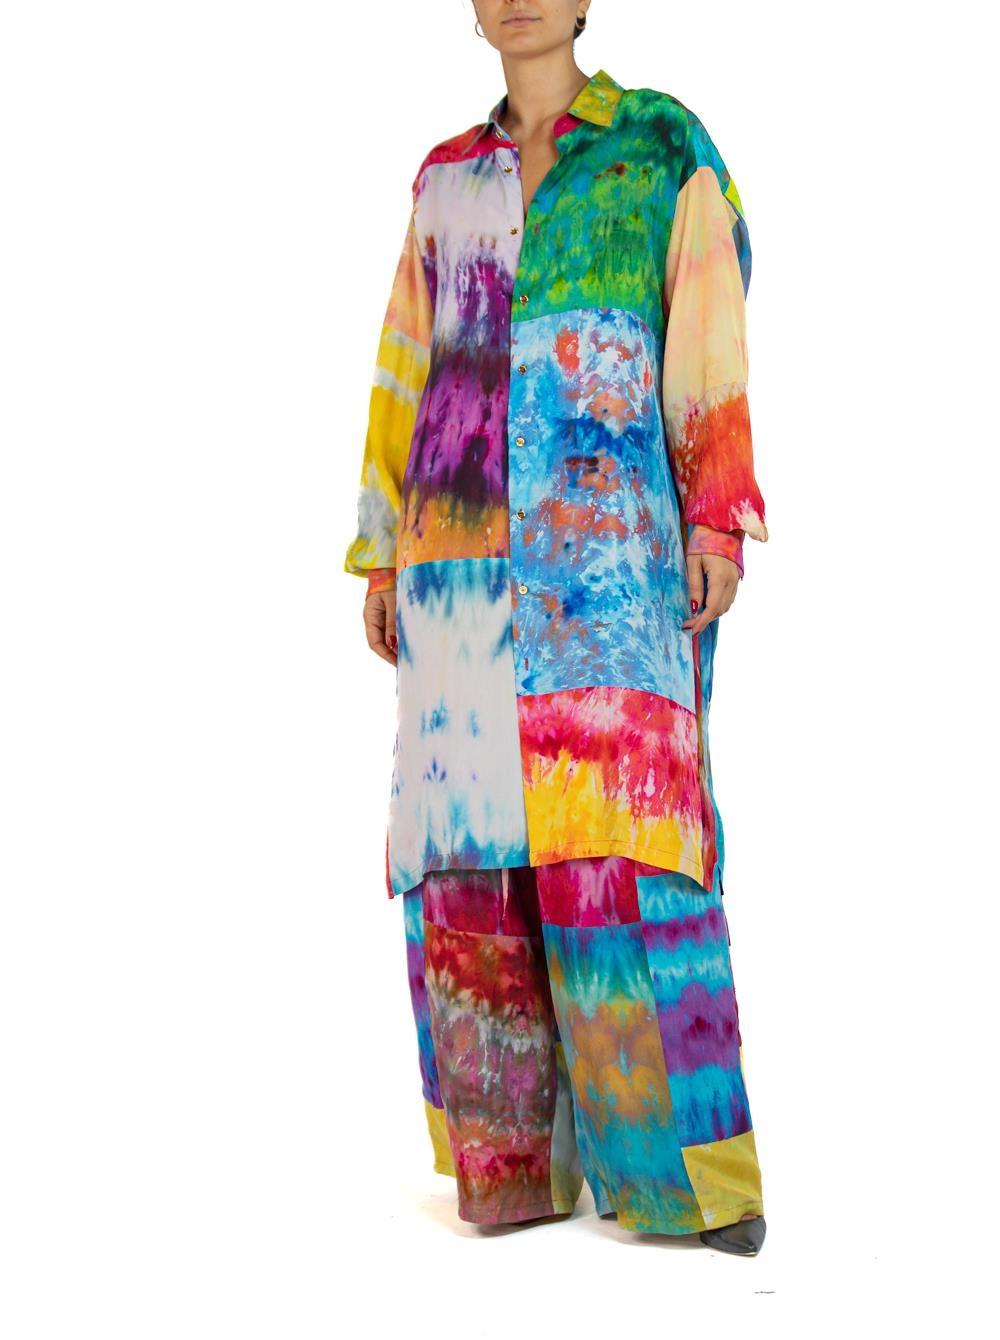 MORPHEW COLLECTION Ice Dye Silk Oversized Button Down Shirt Dress In Excellent Condition For Sale In New York, NY